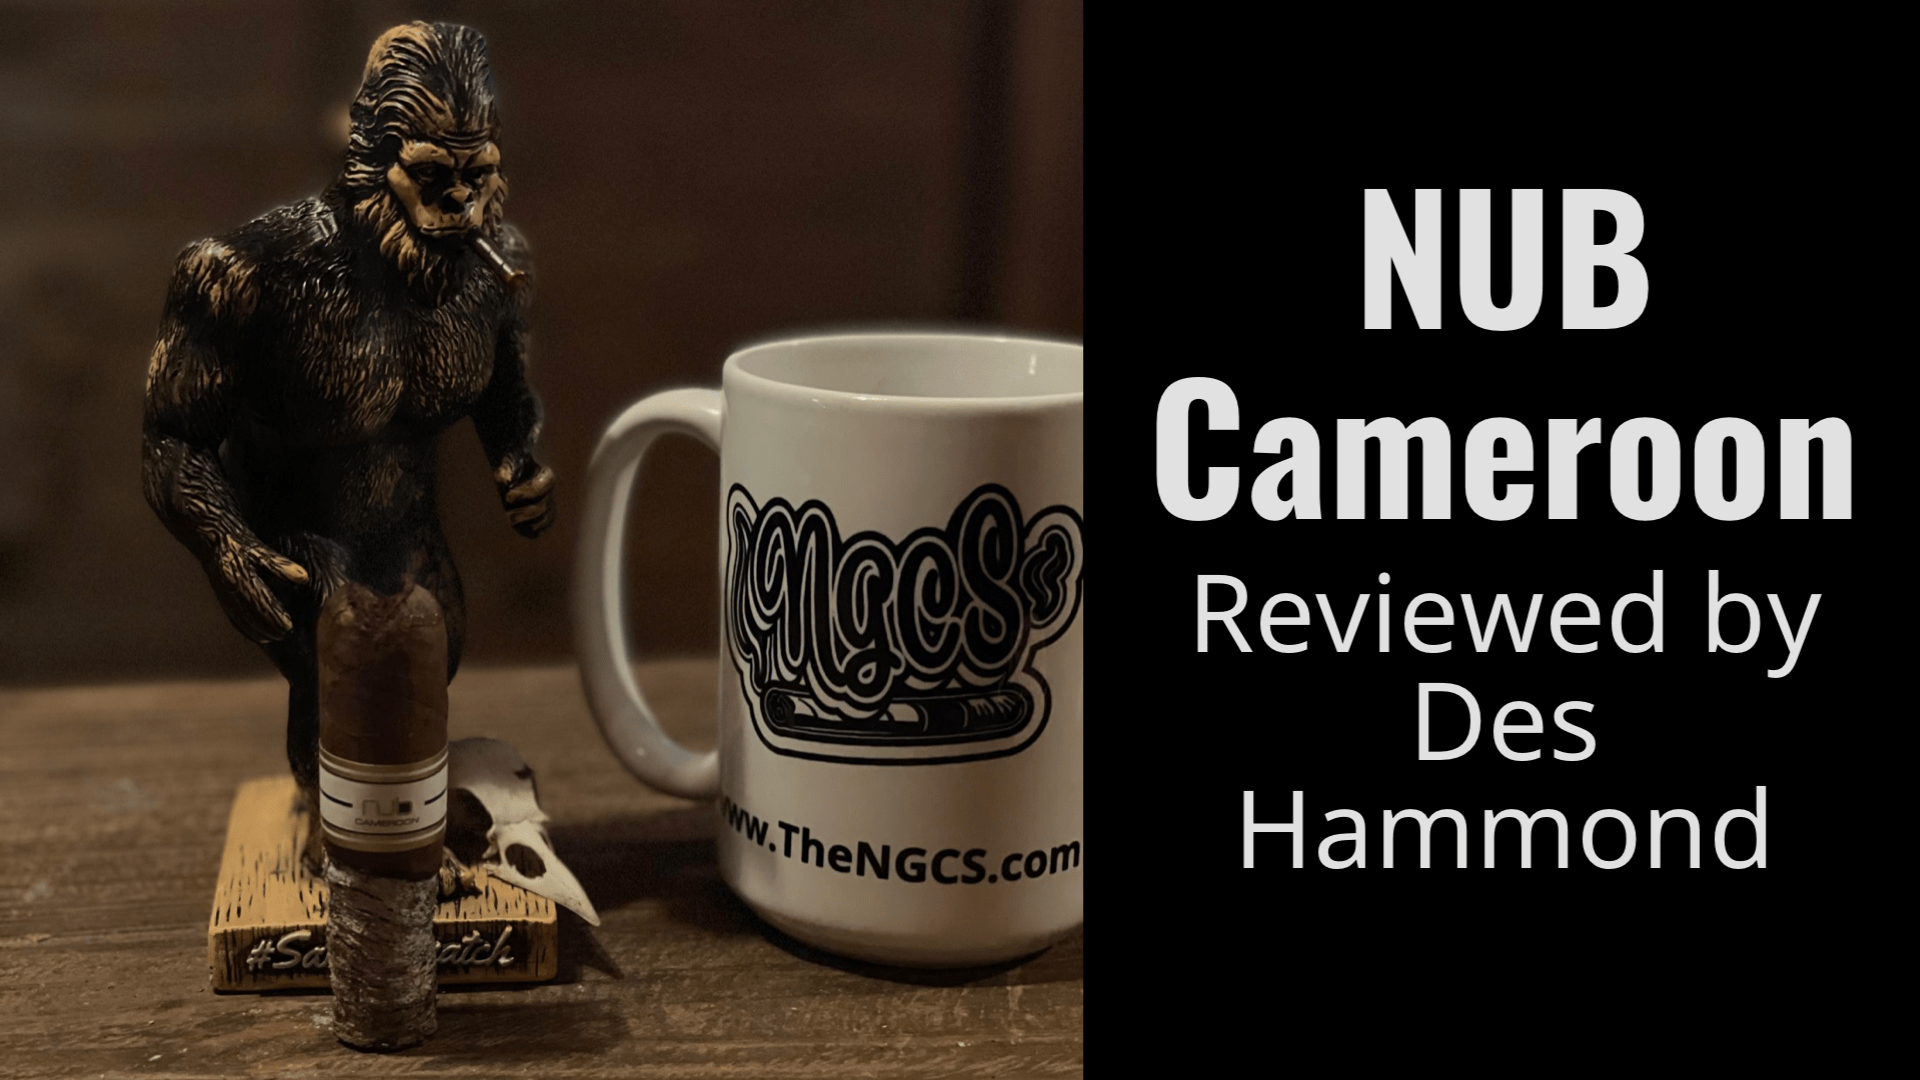 The NUB 460 Cameroon Review by Des Hammond